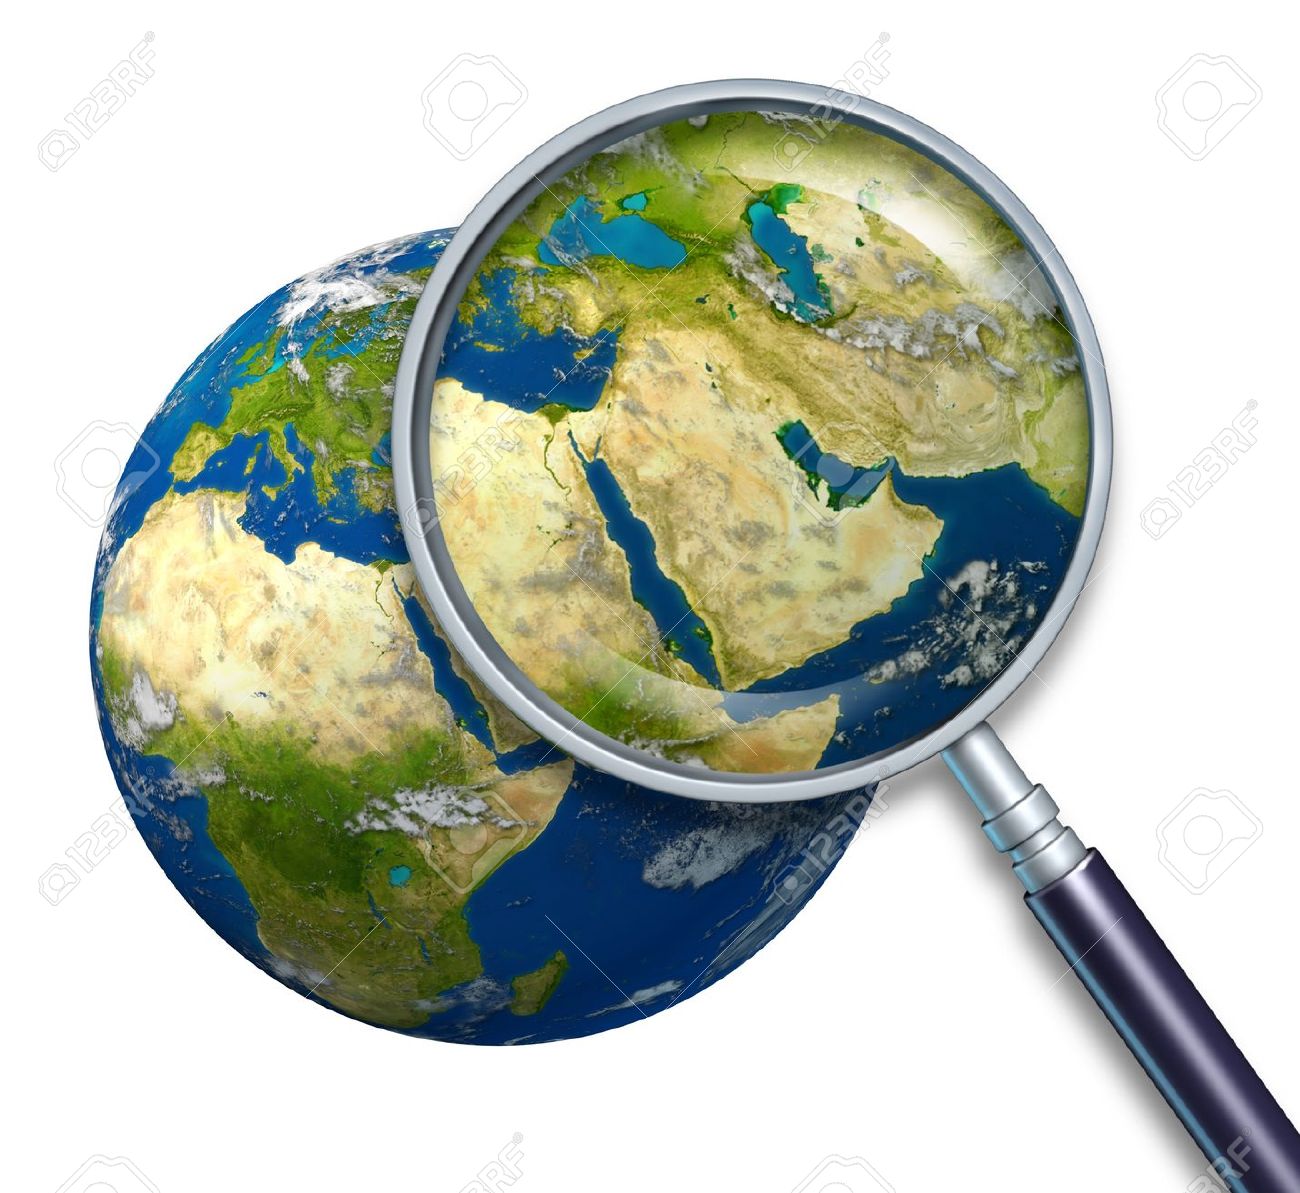 12082765-Planet-Earth-middle-east-crisis-with-political-issues-of-the-persian-gulf-and-crude-oil-with-countri-Stock-Photo